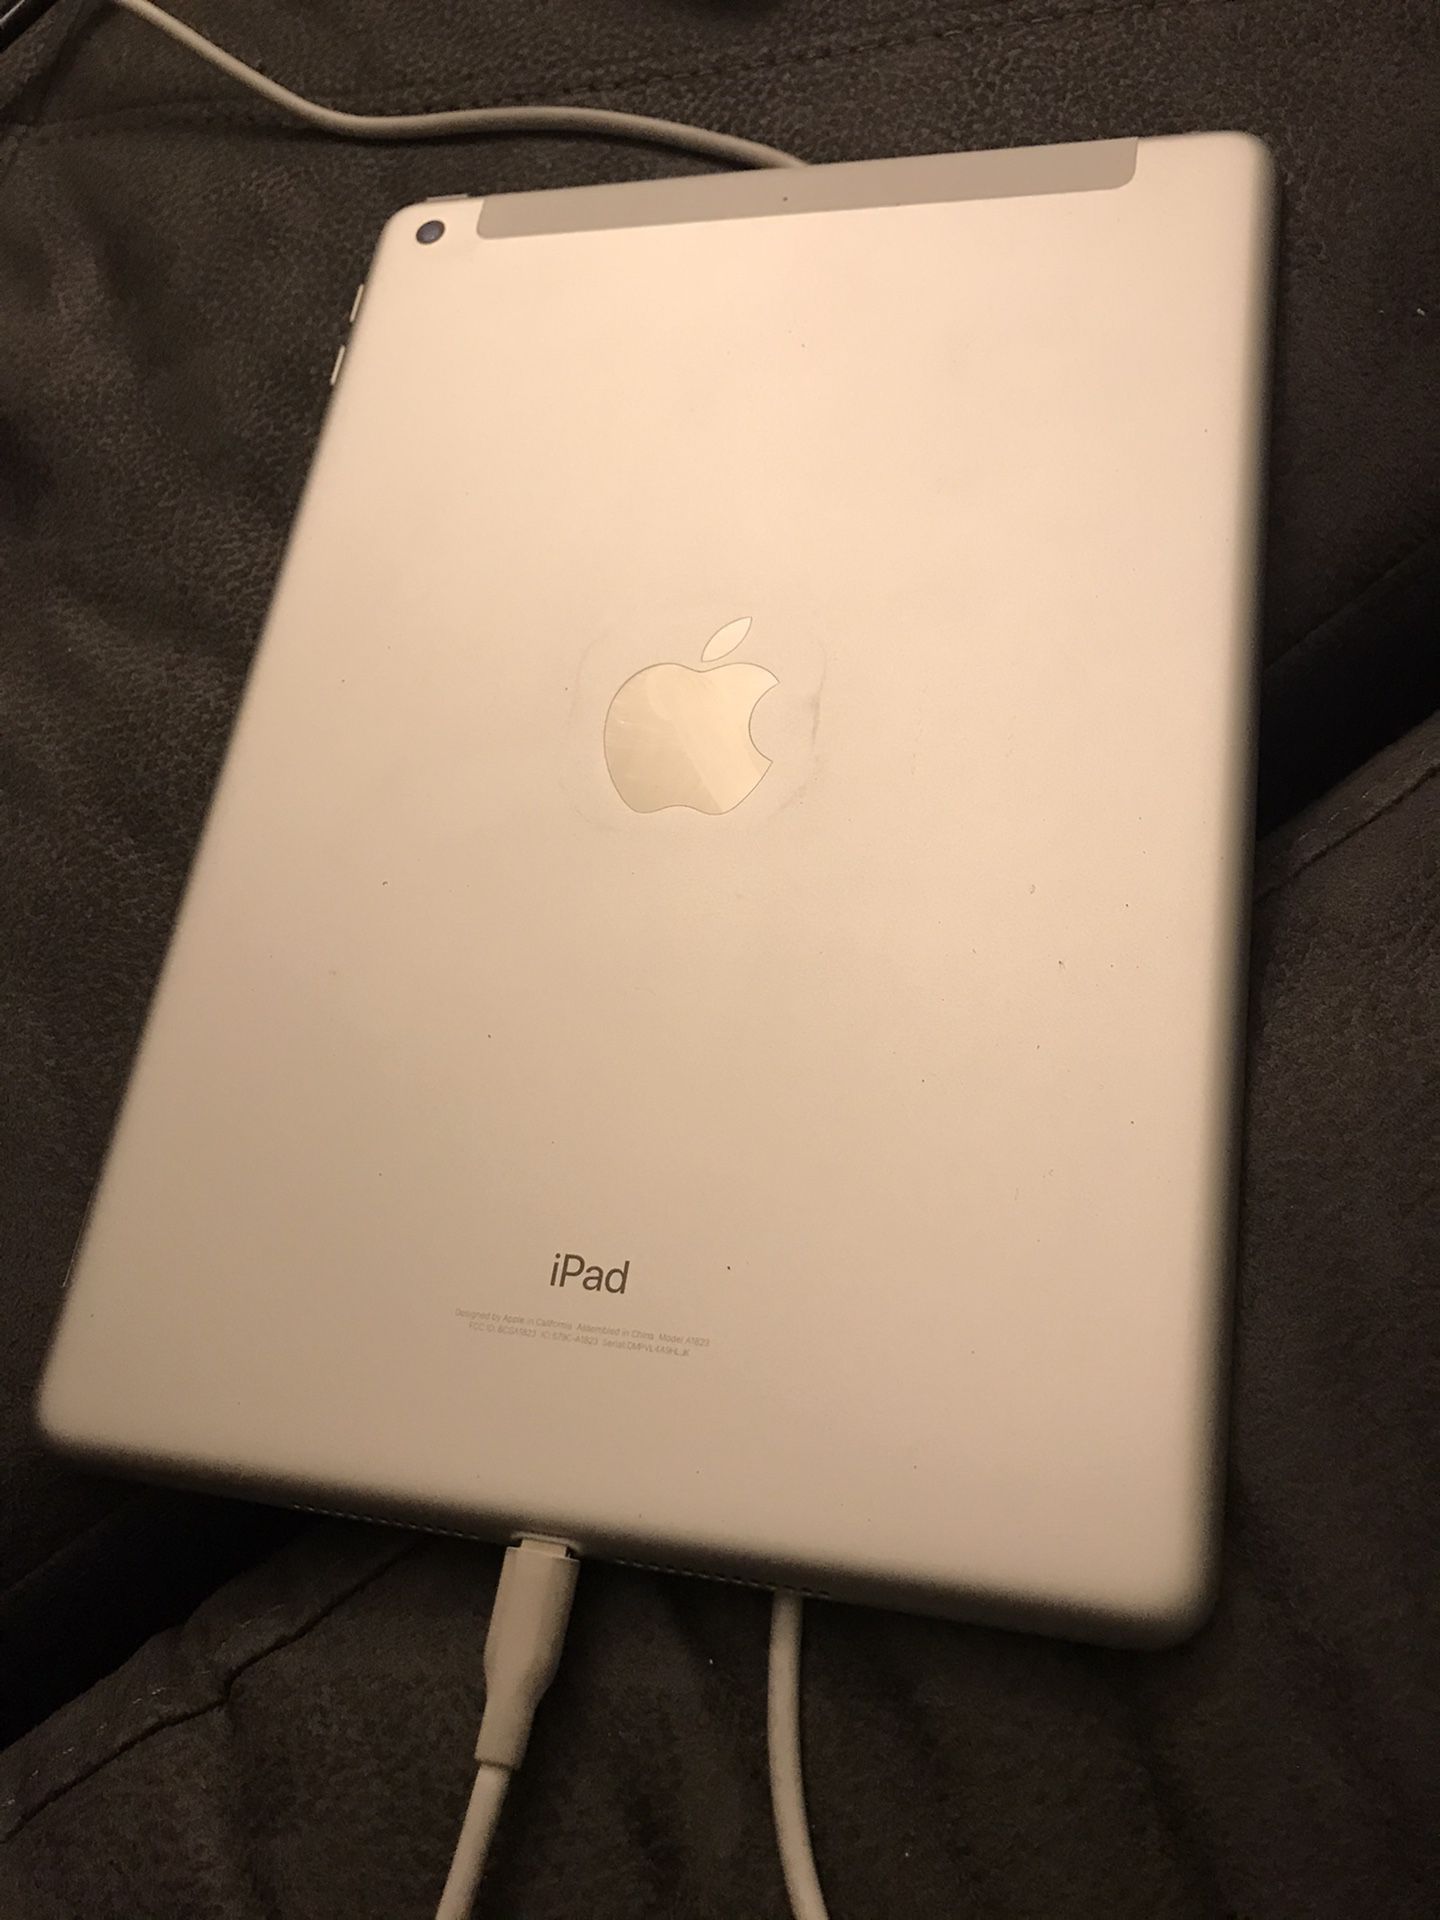 iPad Air 2. 32 gb LTE (and WiFi) iCloud unlocked 9.5 condition.